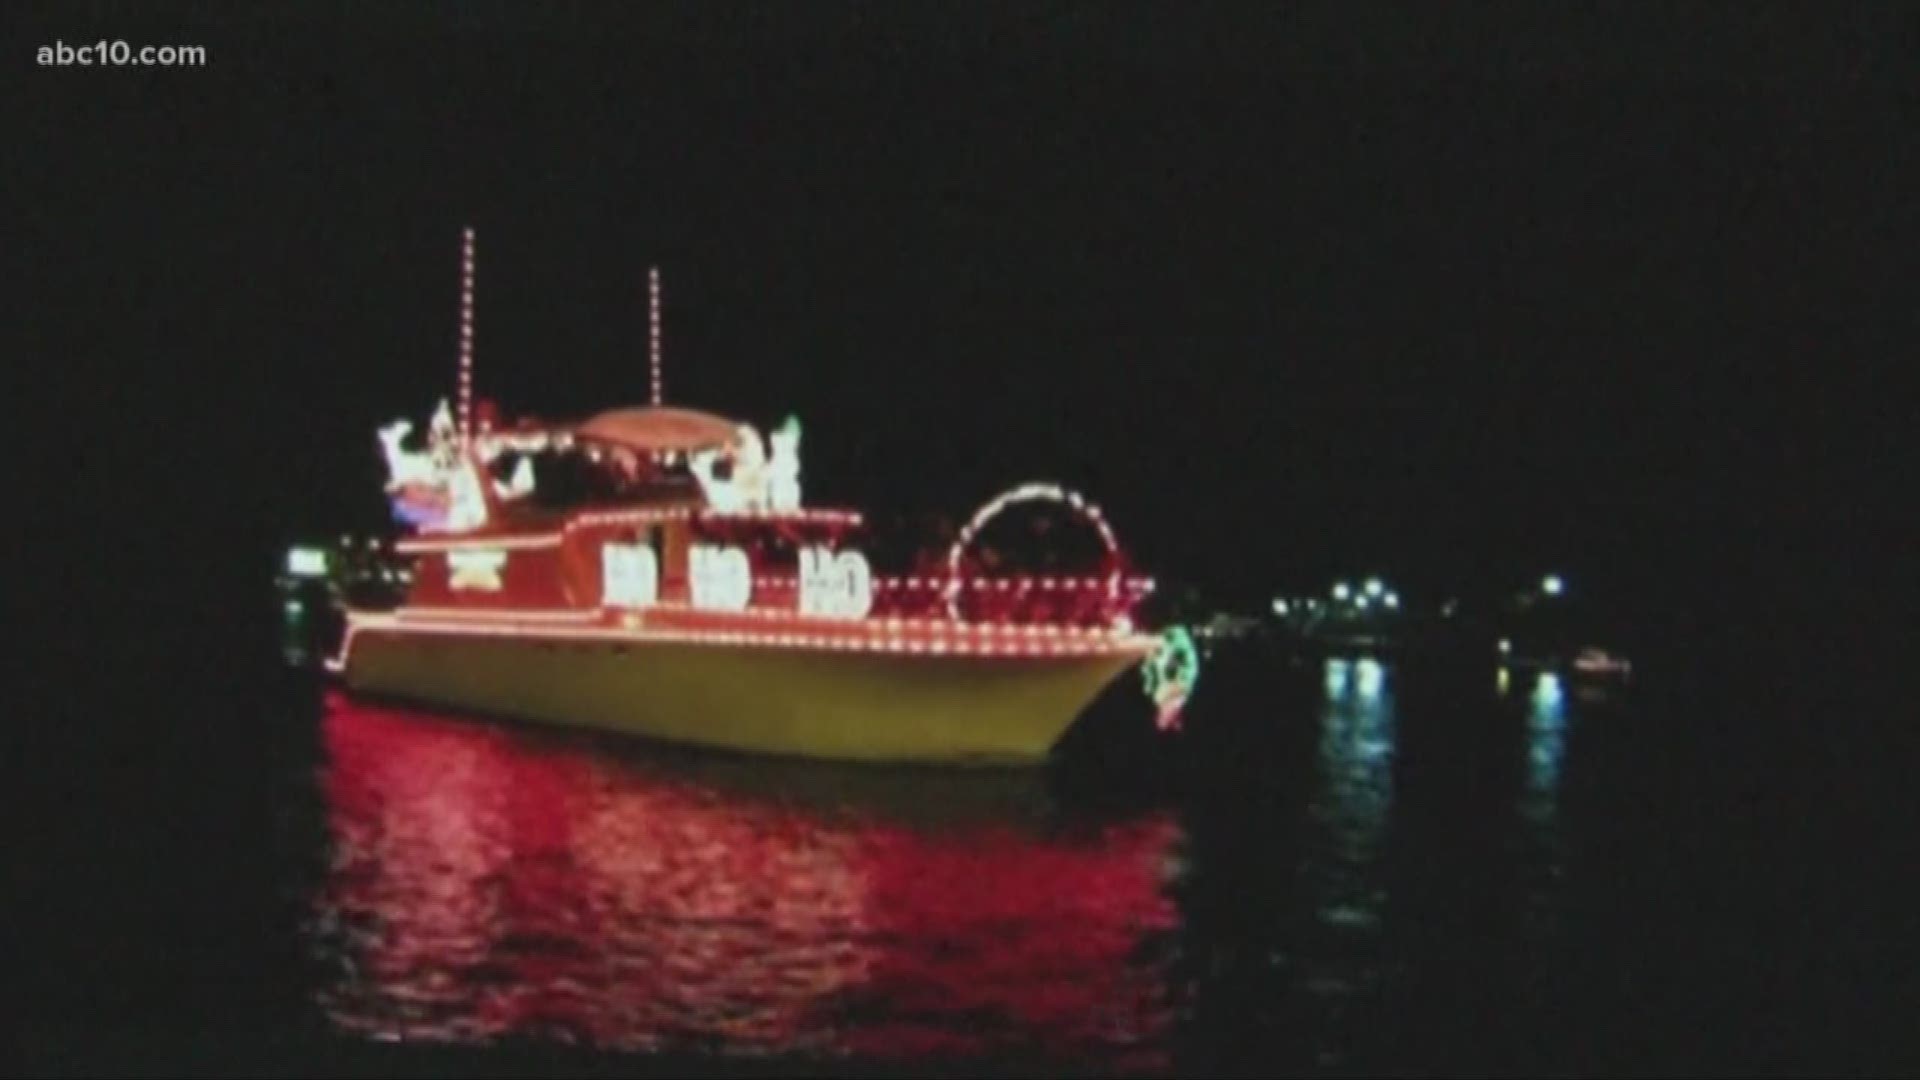 The colorful parade is put on by the Stockton Yacht Club. Boats decorated in holiday attire strut their stuff on the water near Weber Point. More than 30 boats take part in the parade. All proceeds go to charity.